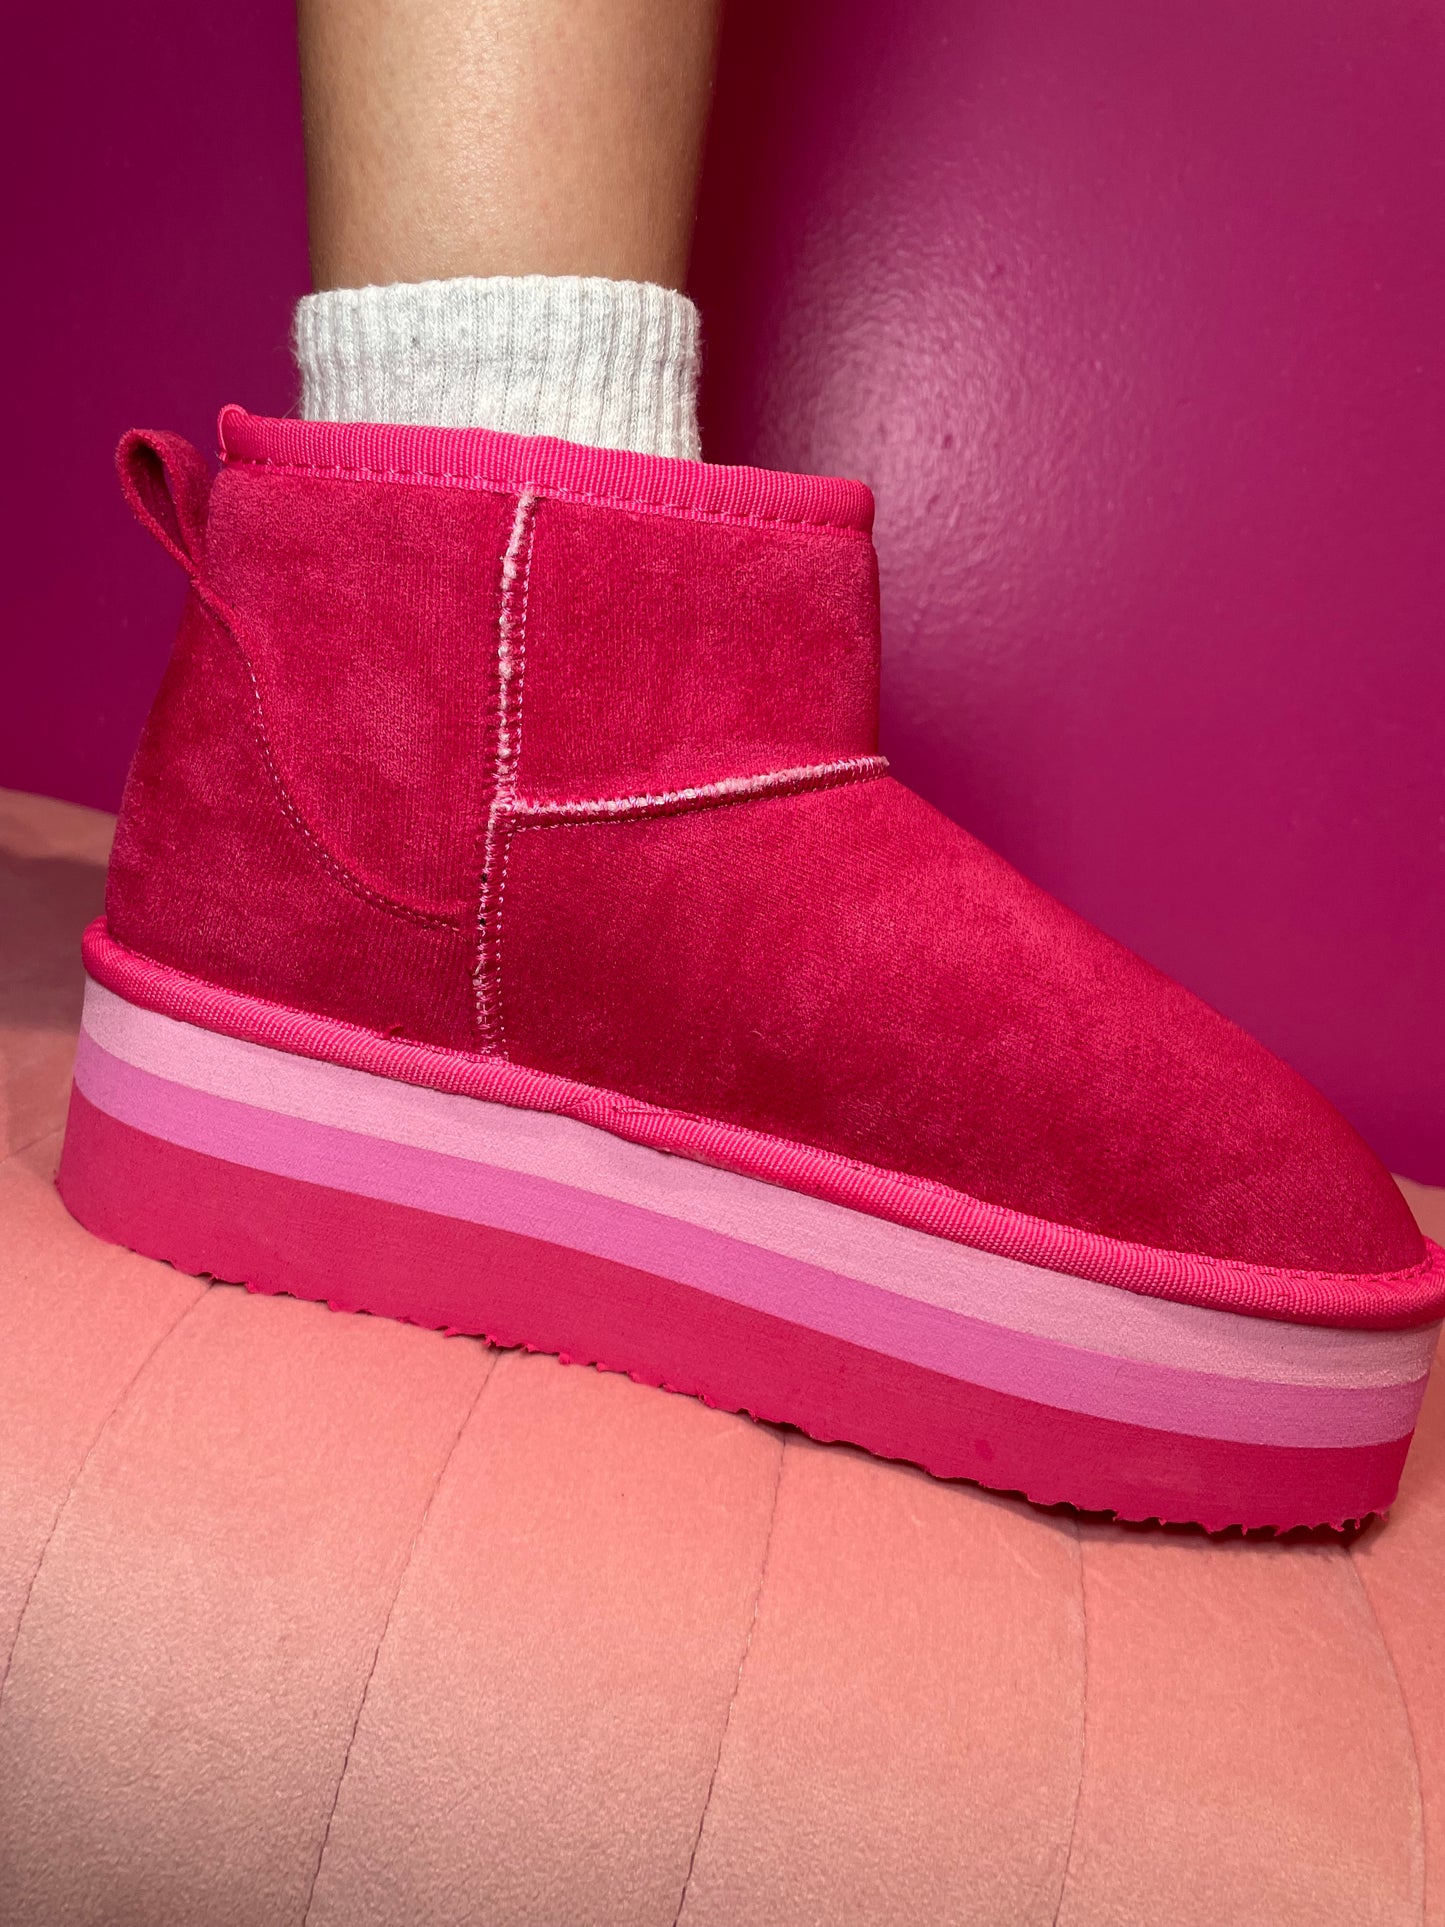 Miss Americana Platform Boots in Pink